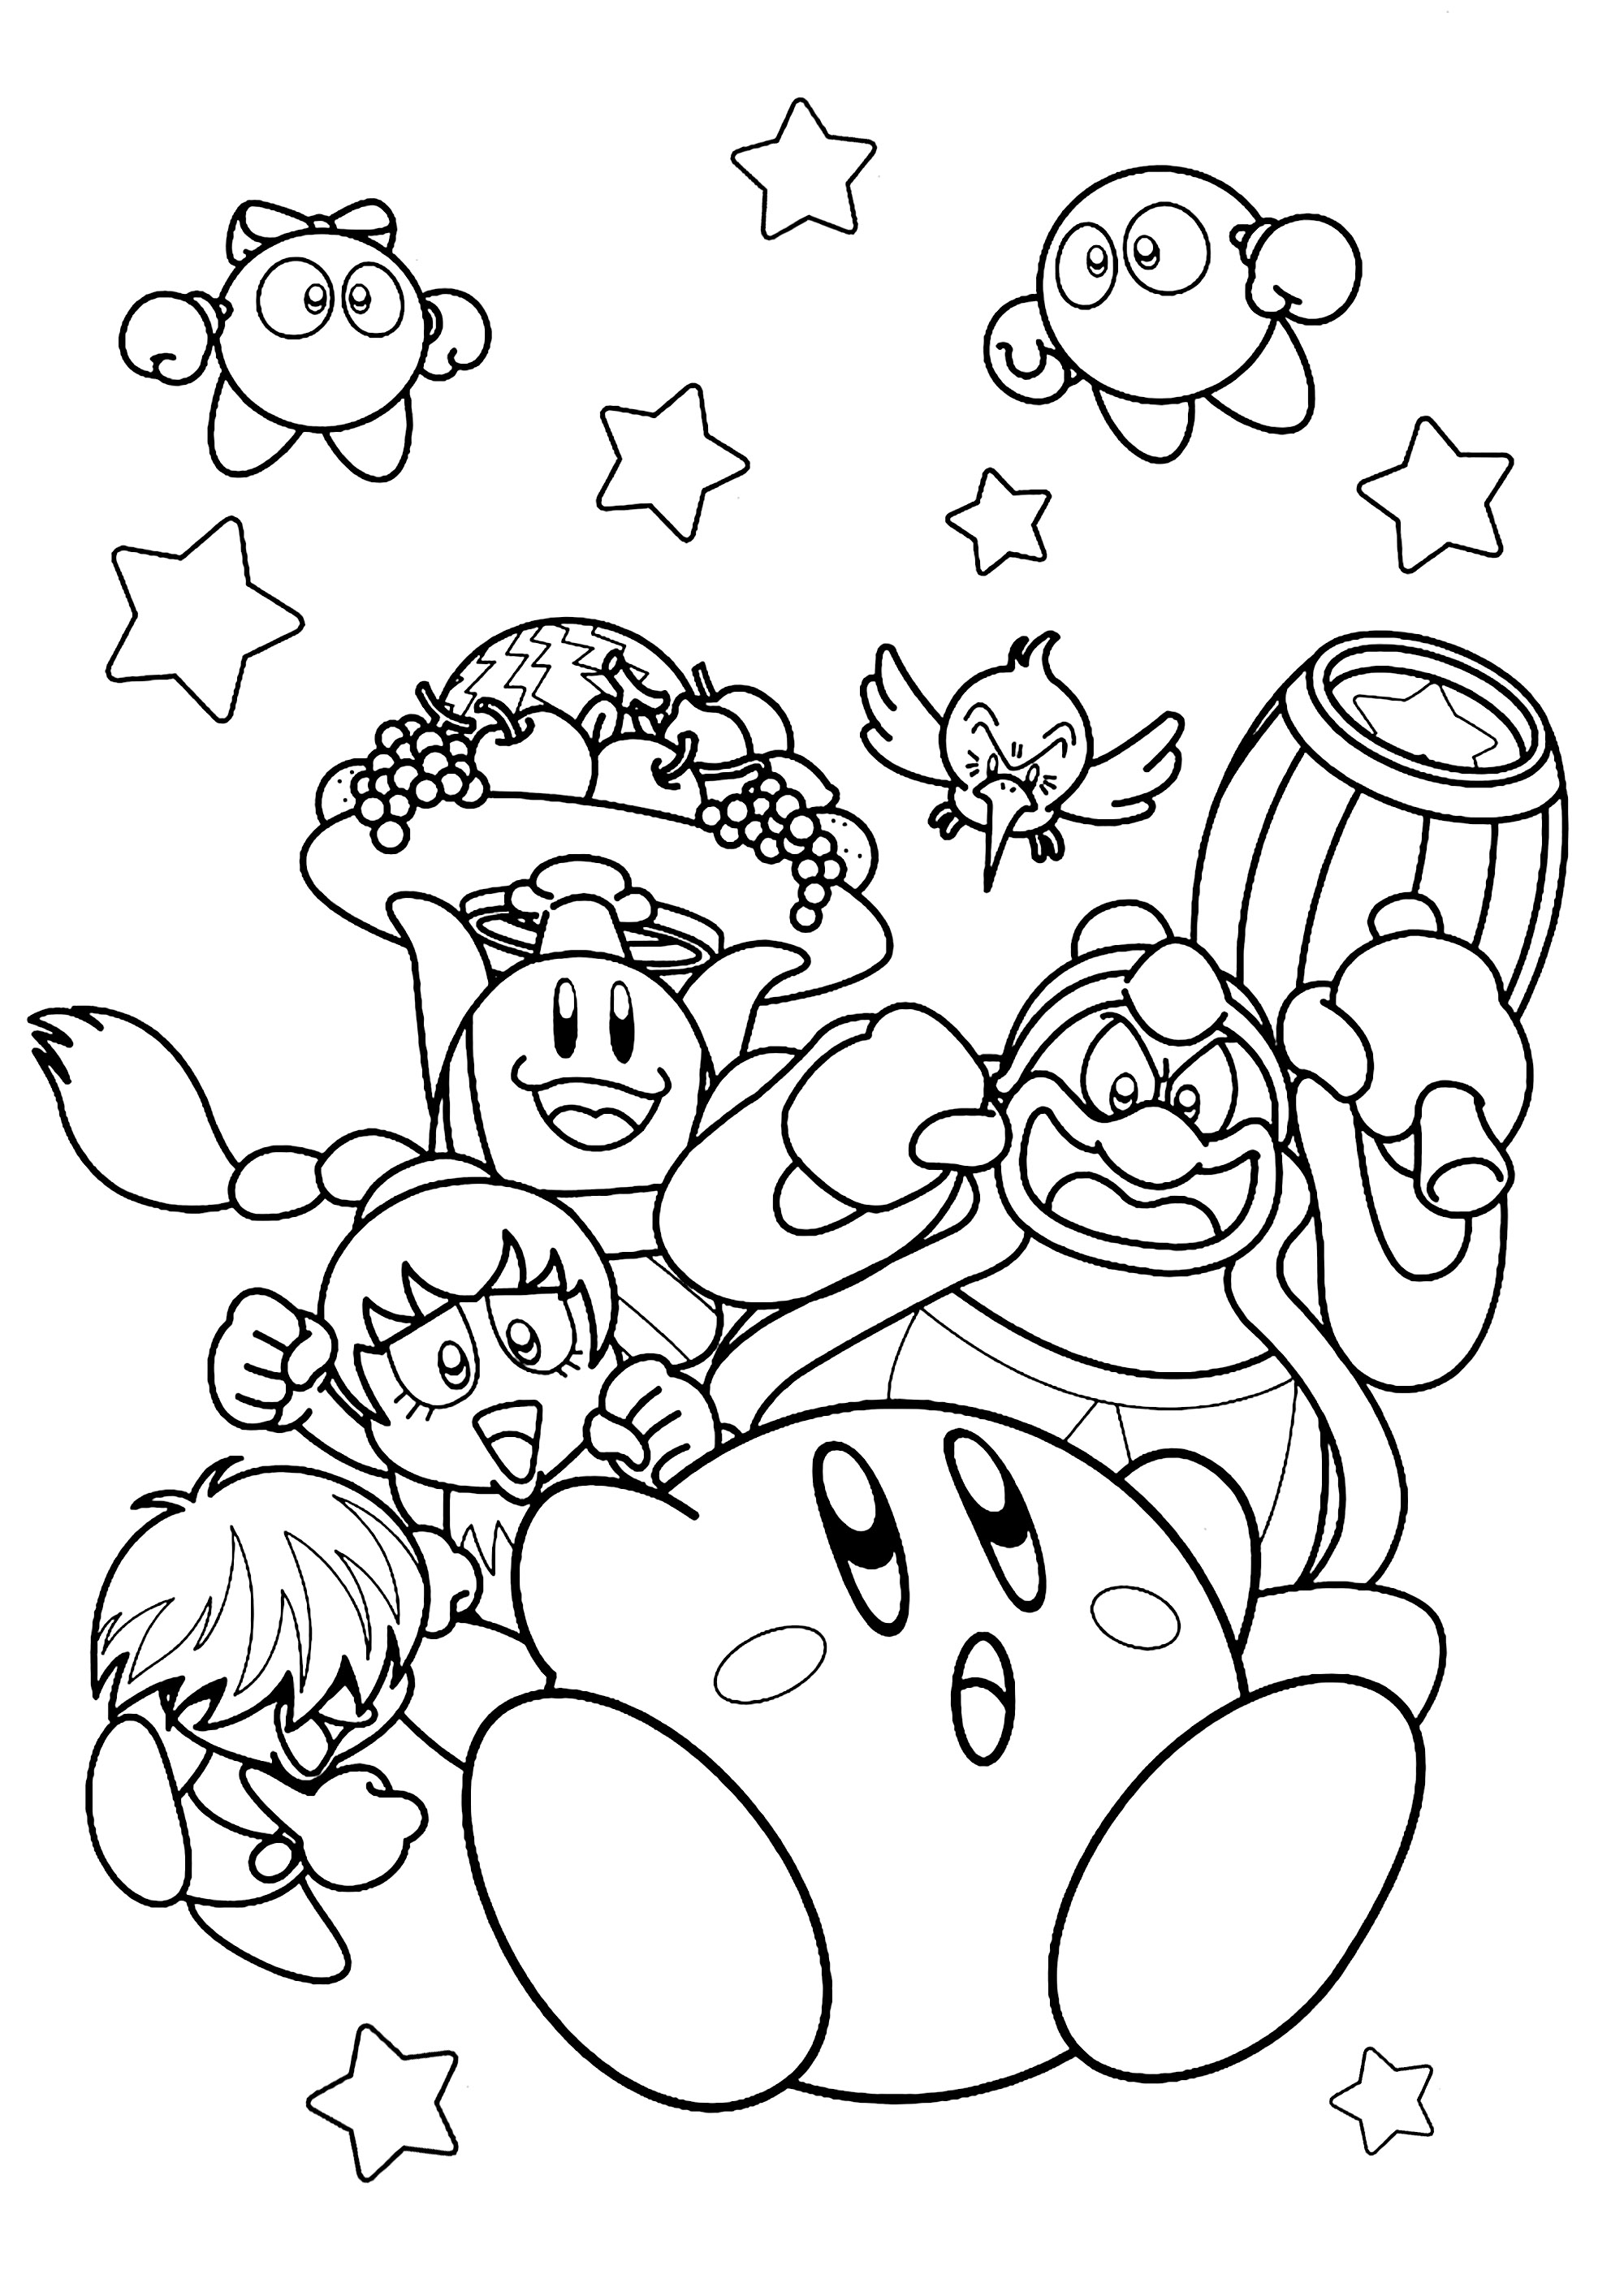 Kirby and other characters - Kirby Kids Coloring Pages